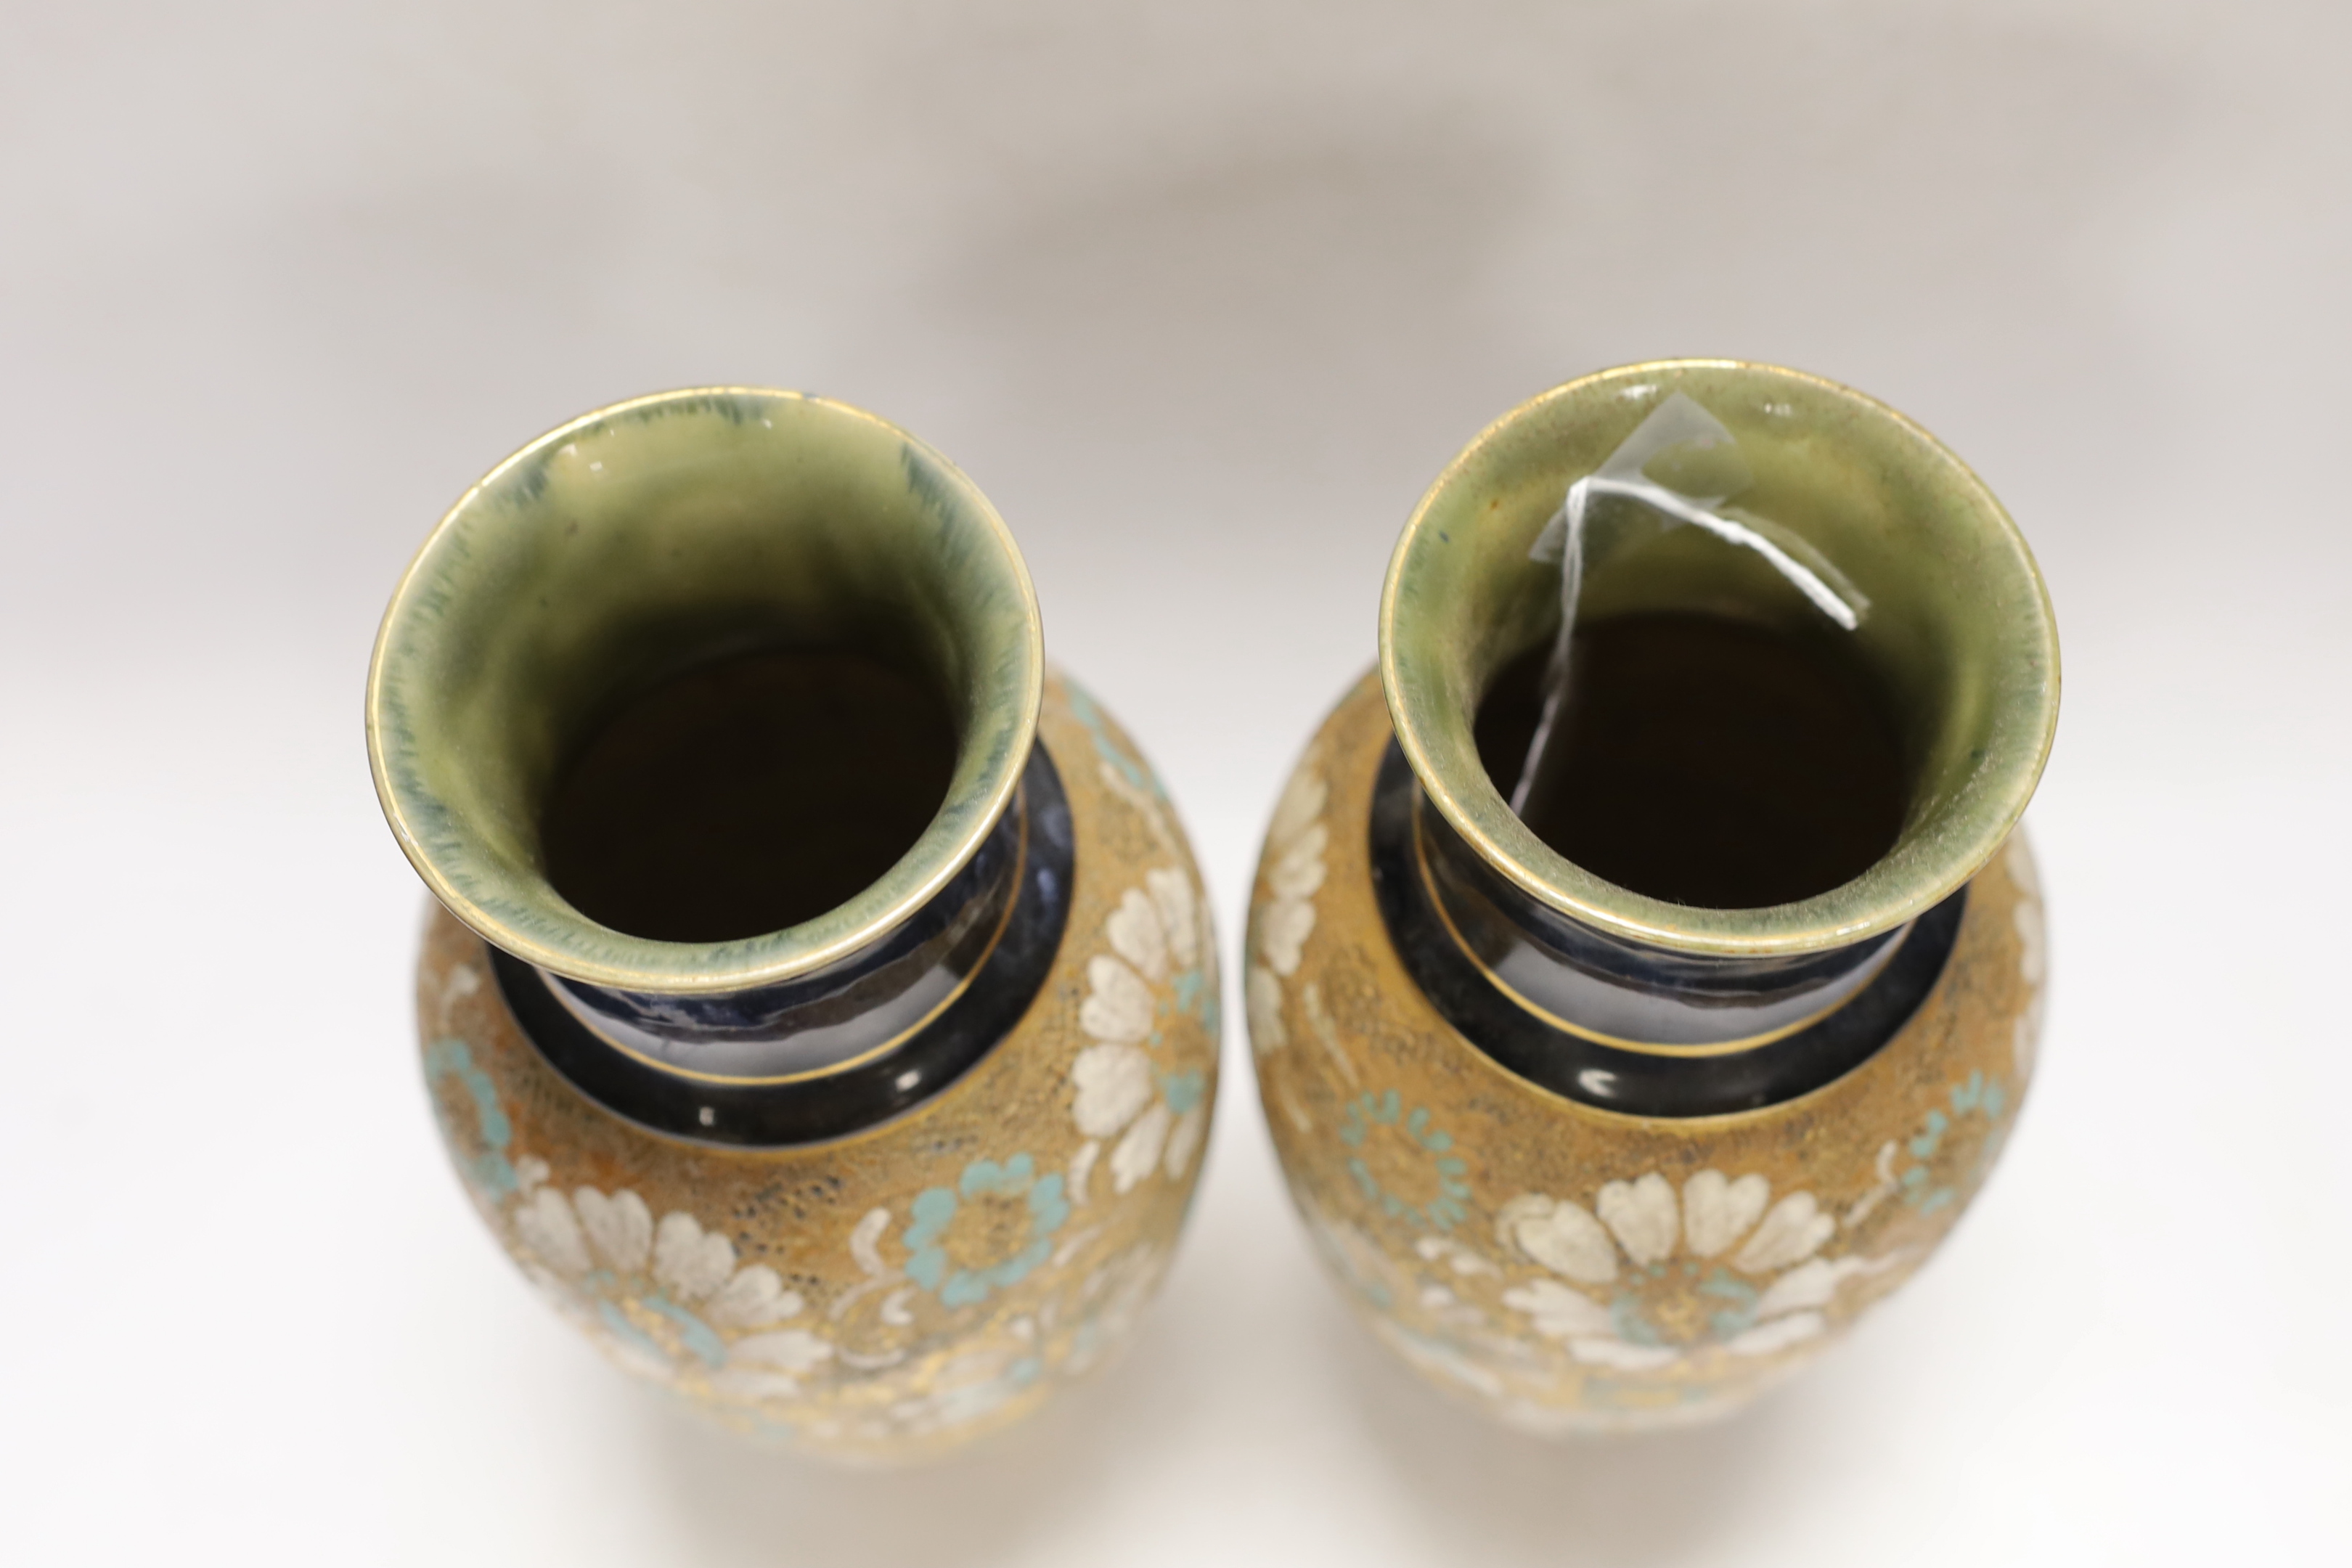 A pair of Royal Doulton Slaters stoneware vases, 28cm high